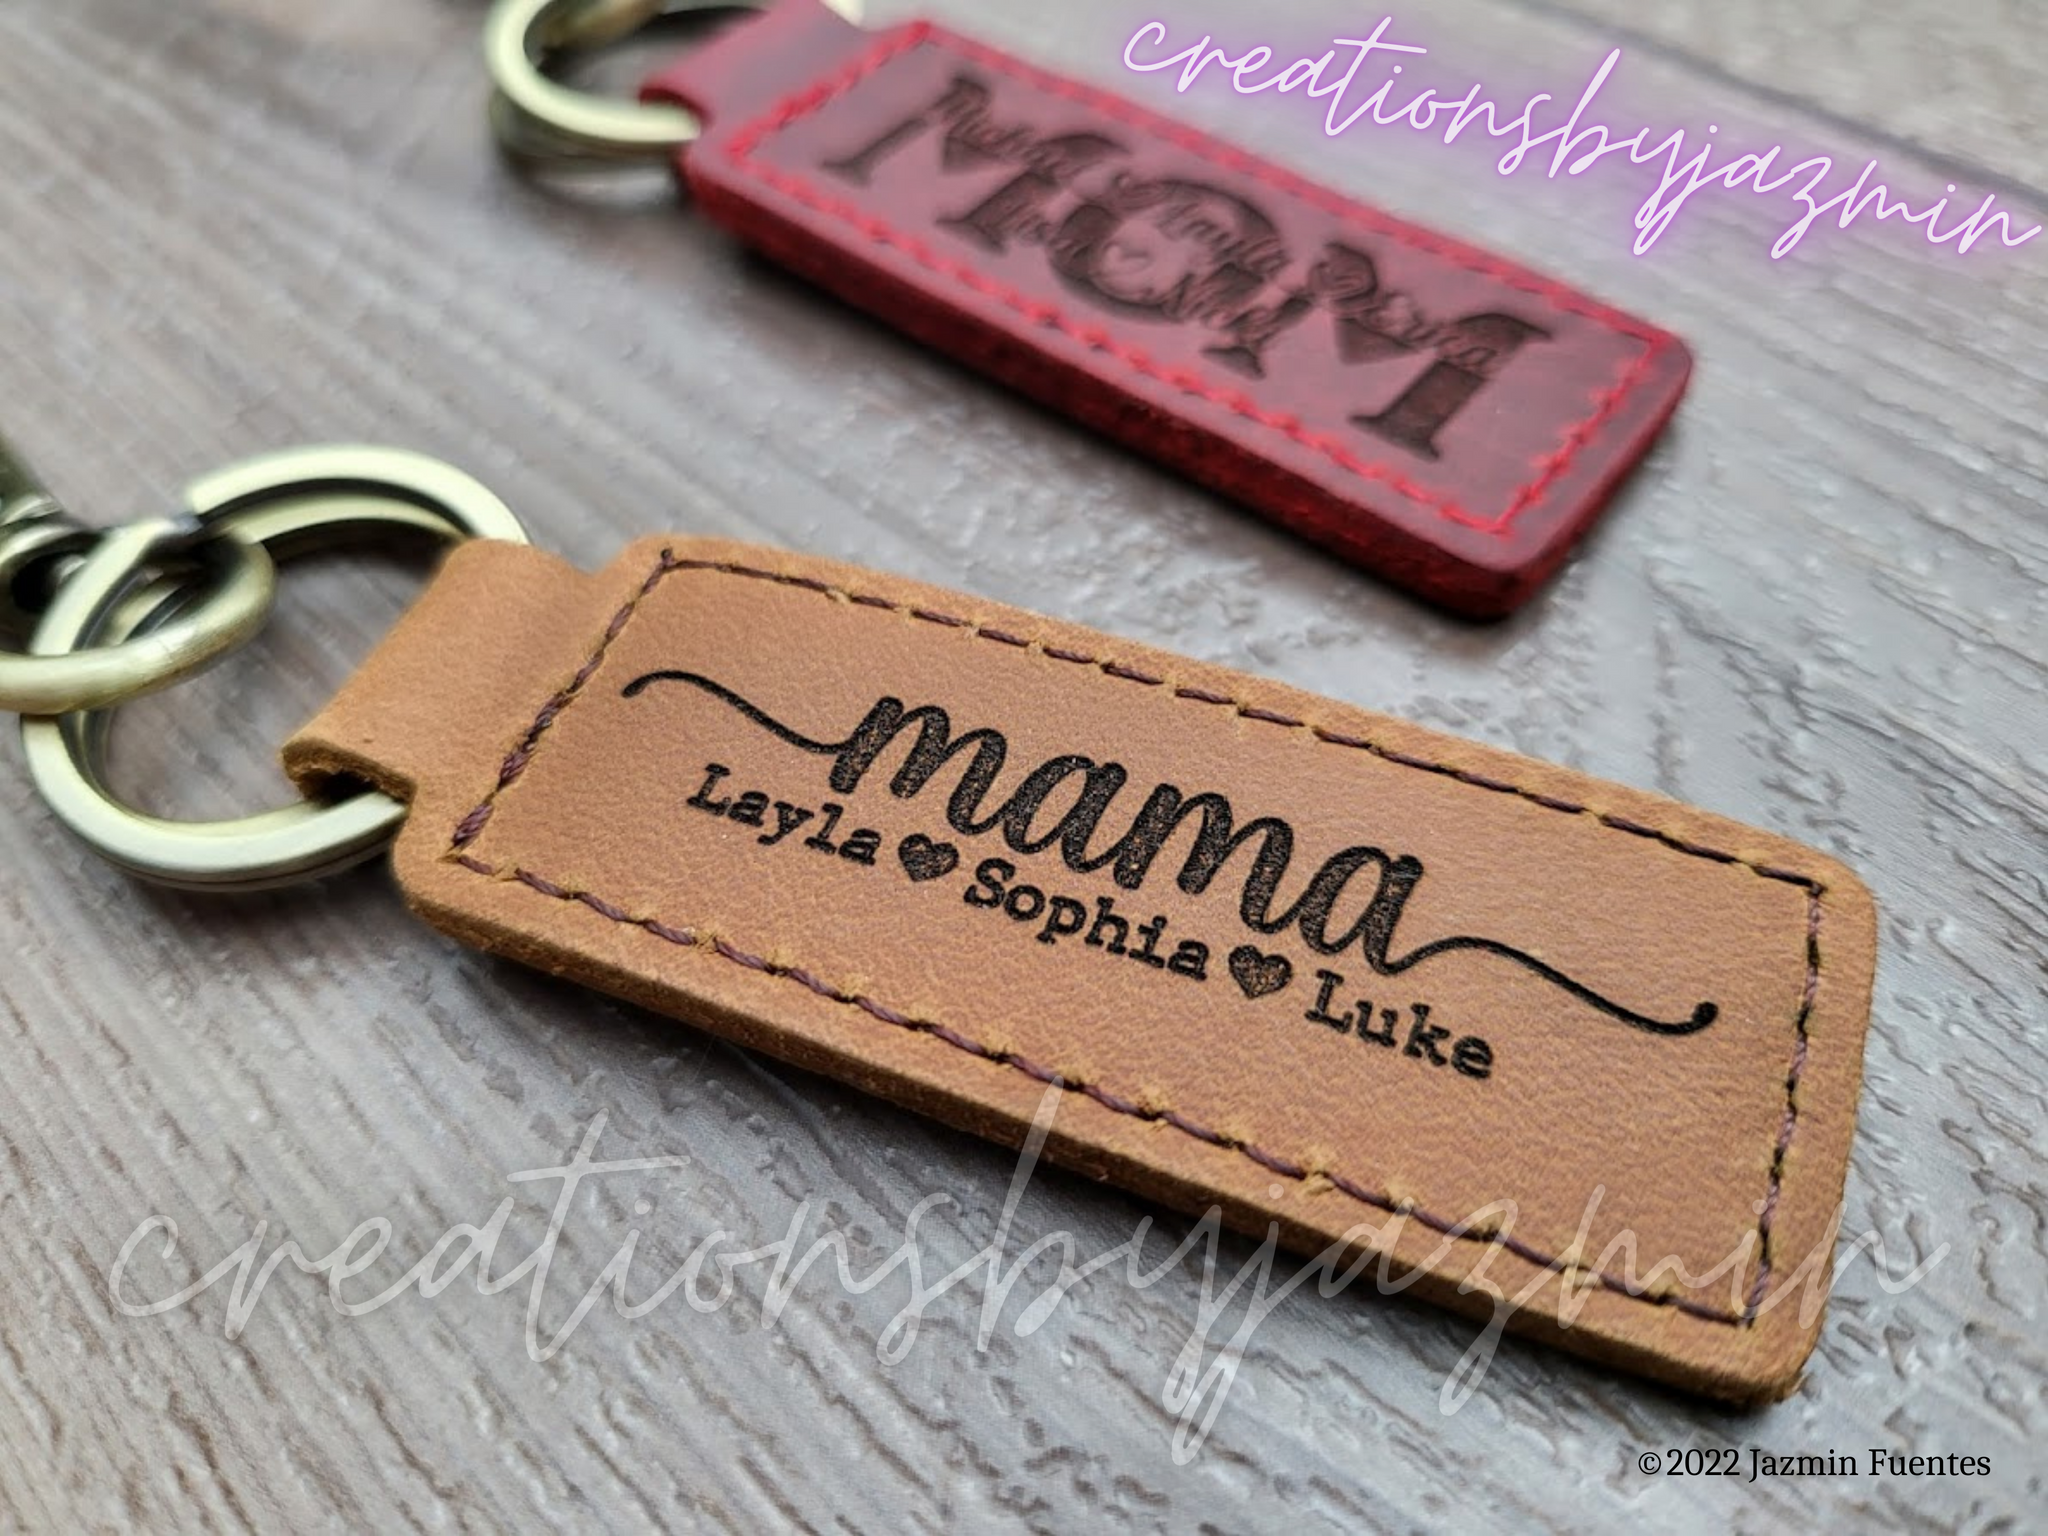 Mom Keychain, Genuine Leather Mother Keychains, Personalized Mother's Day Gift